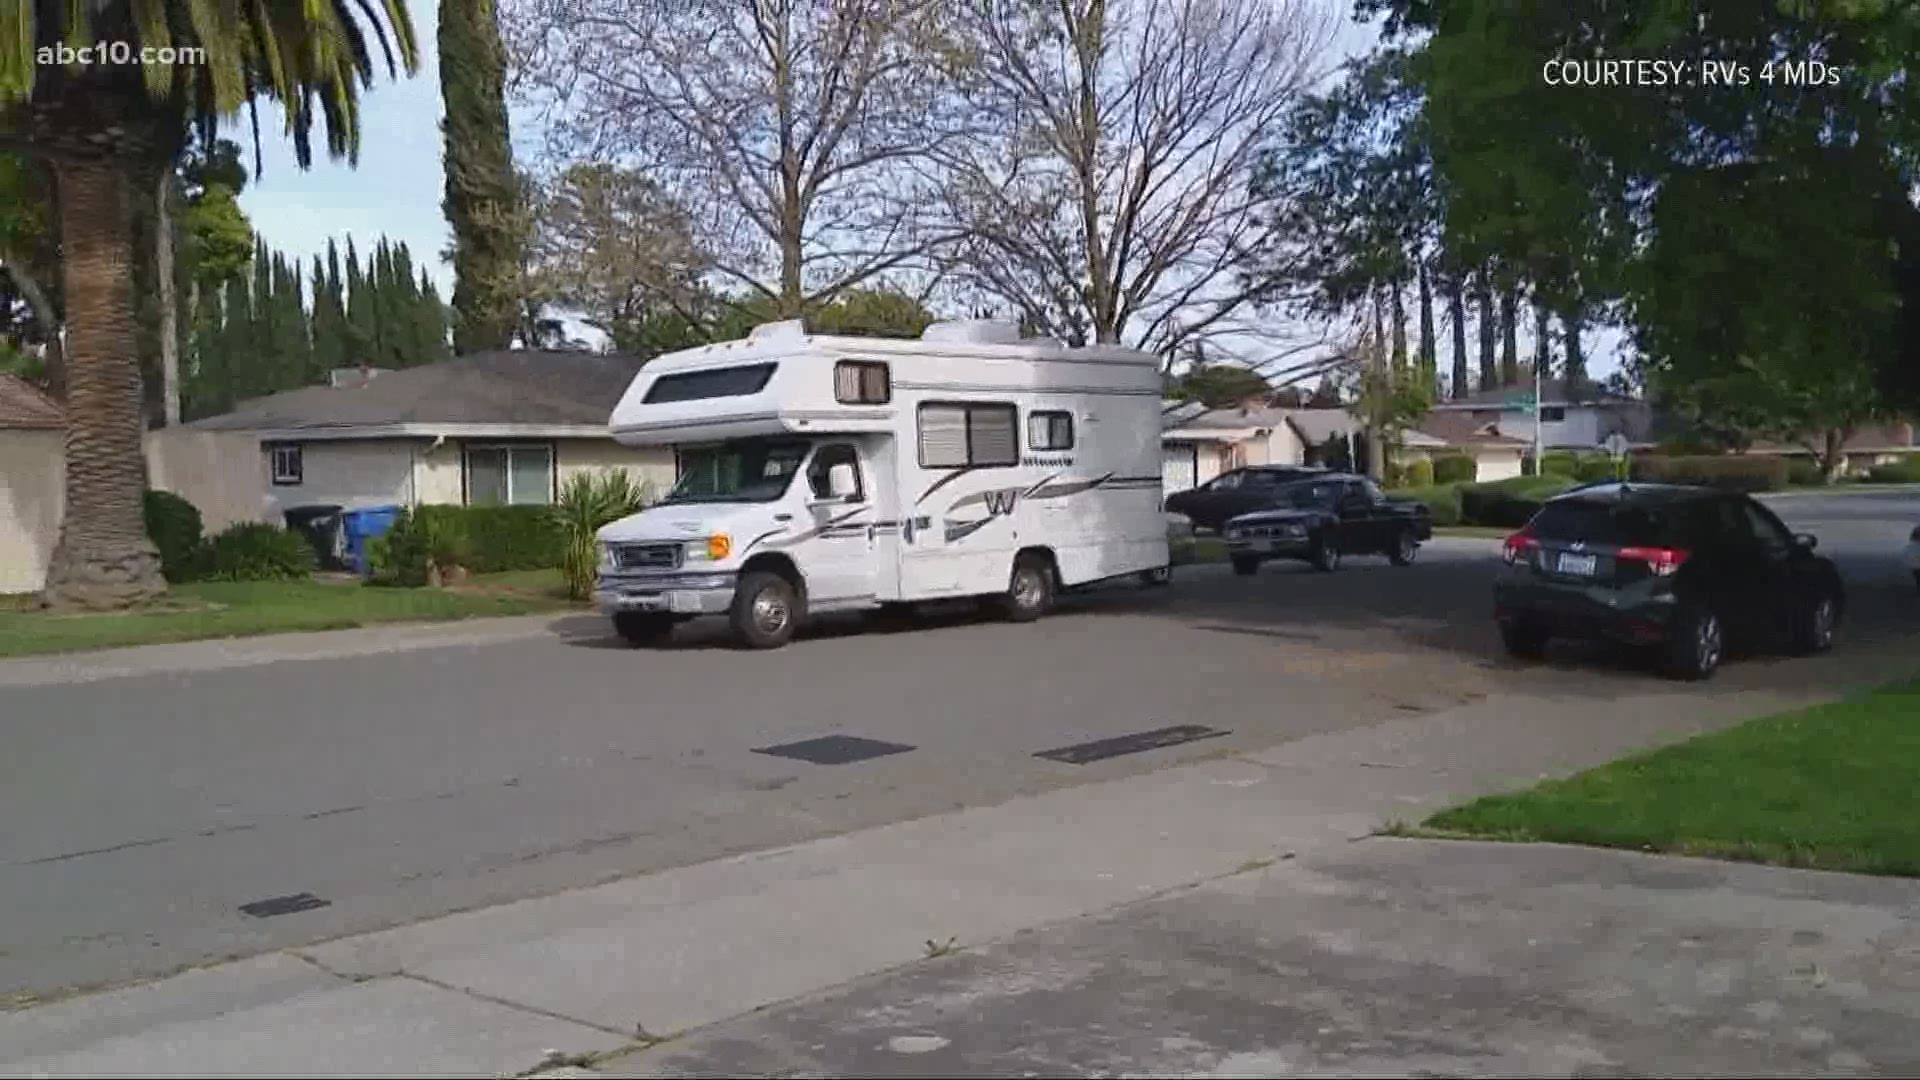 The group, RVs 4 MDs, finds strangers with RVs who are willing to loan them to the health care workers so they can come home without worrying about infecting family.